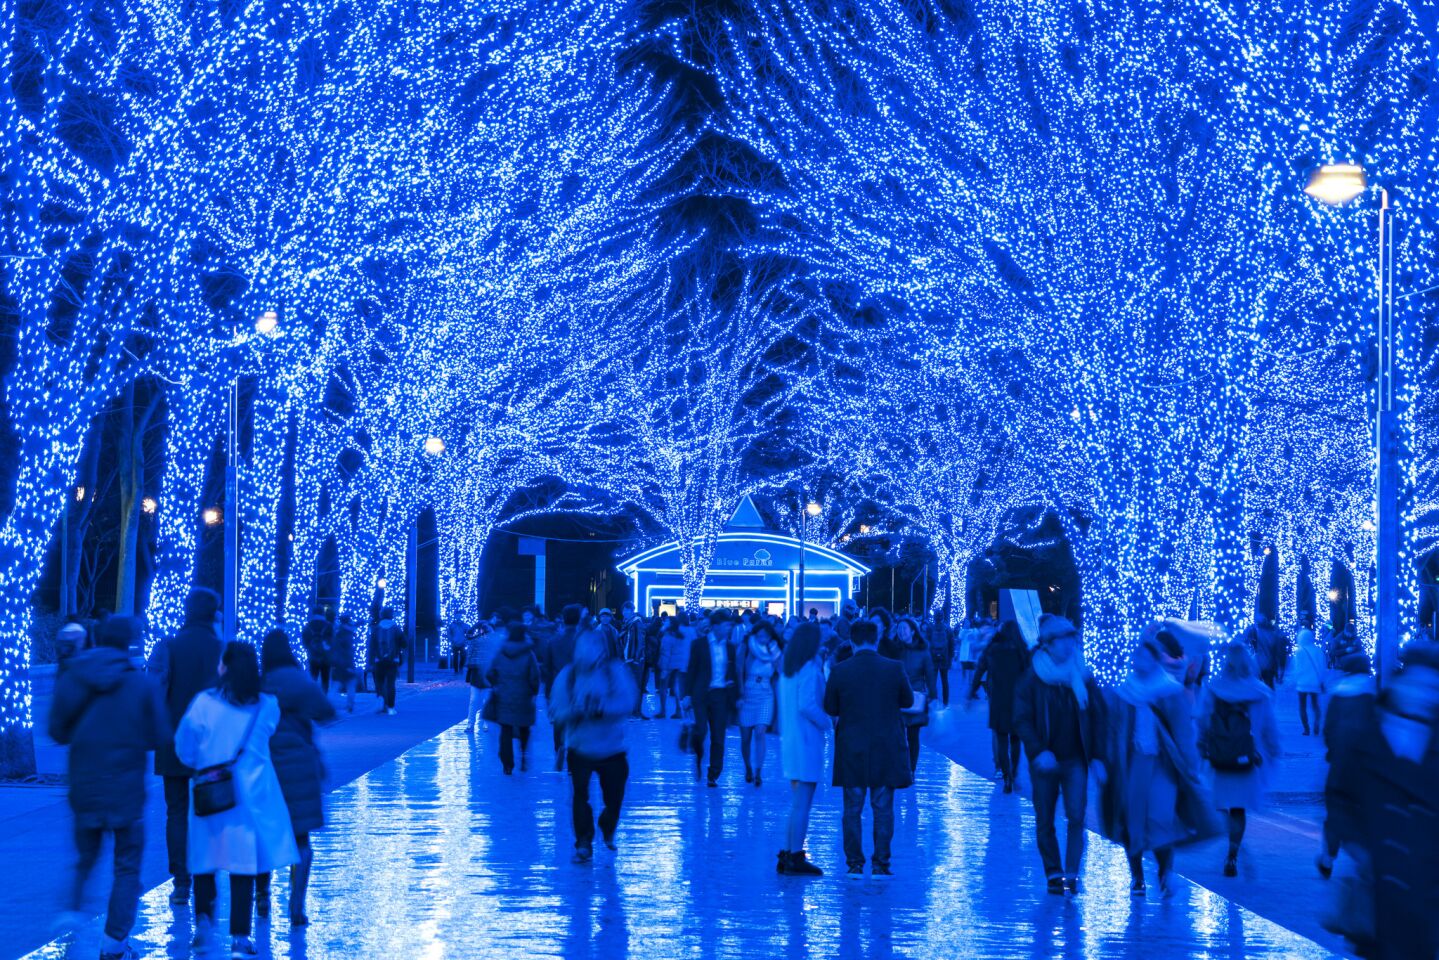 Last year's "Blue Cave" theme at the illumination event in the Shibuya ward of Tokyo featured 600,000 blue LED lights in Yoyogi Park.